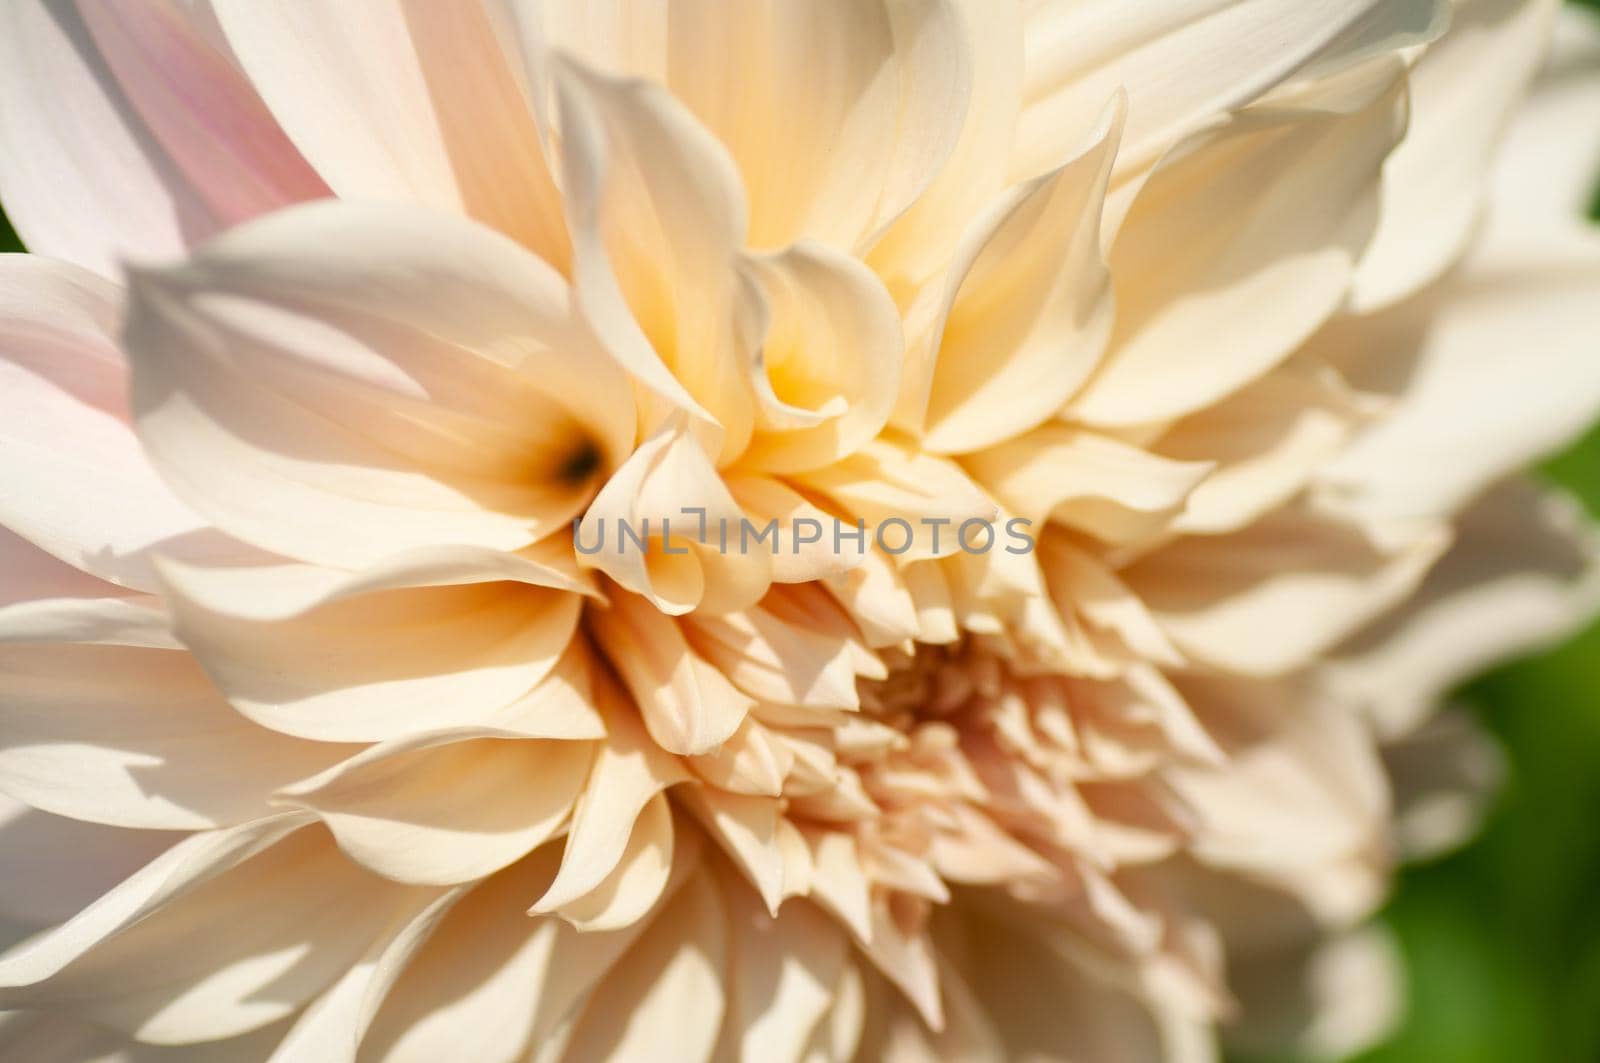 Peach dahlia under soft sunset light growing outside in open air district garden close up, macro by shanserika